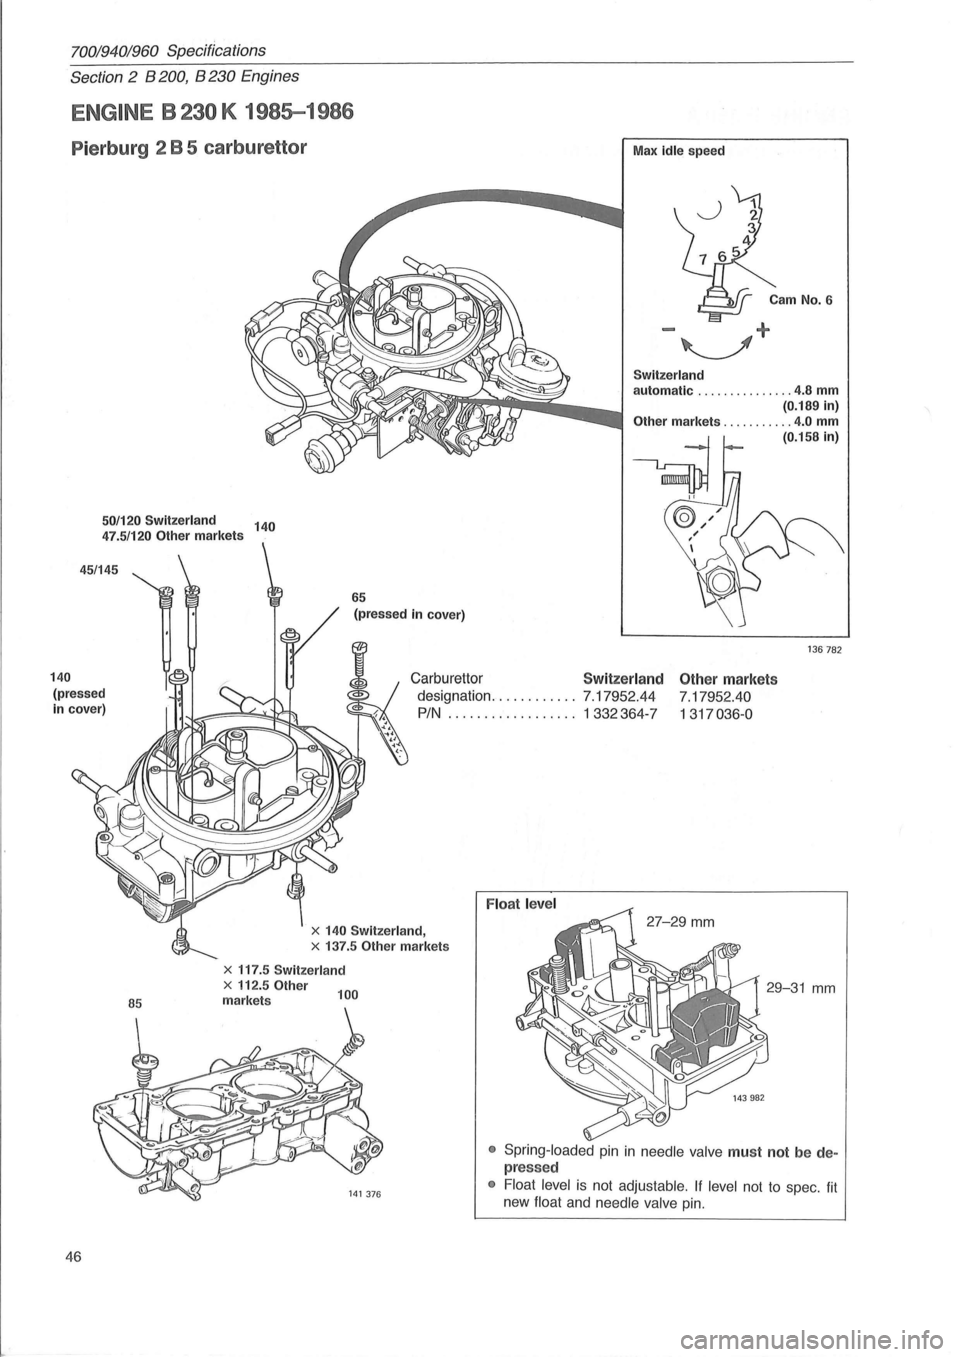 VOLVO 940 1982  Service Service Manual 70019401960 Specifications 
Section 2 B 200, B 230 Engines 
ENGINE B 230 K 1985-1986 
Pierburg  2 B 5 carburettor Max idle speed 
Cam No.6 
- + 
~ 
Switzerland automatic ............... 4.8 mm (0.189 